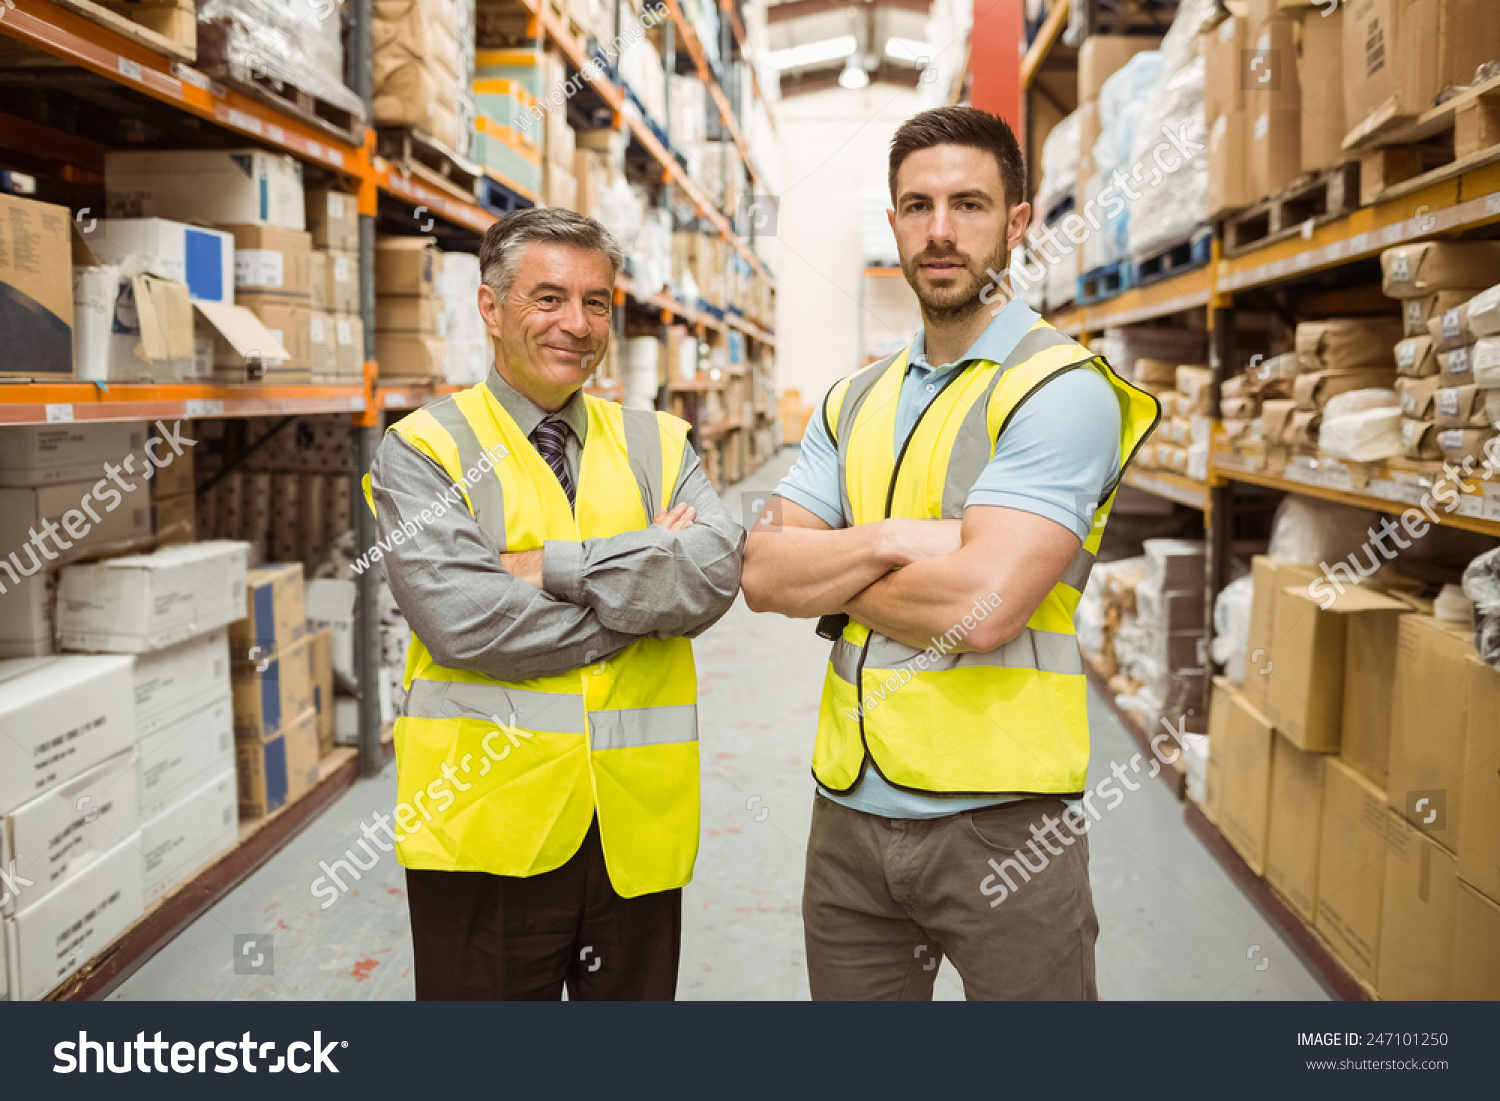 Warehouse team standing with arms crossed in a large warehouse #247101250